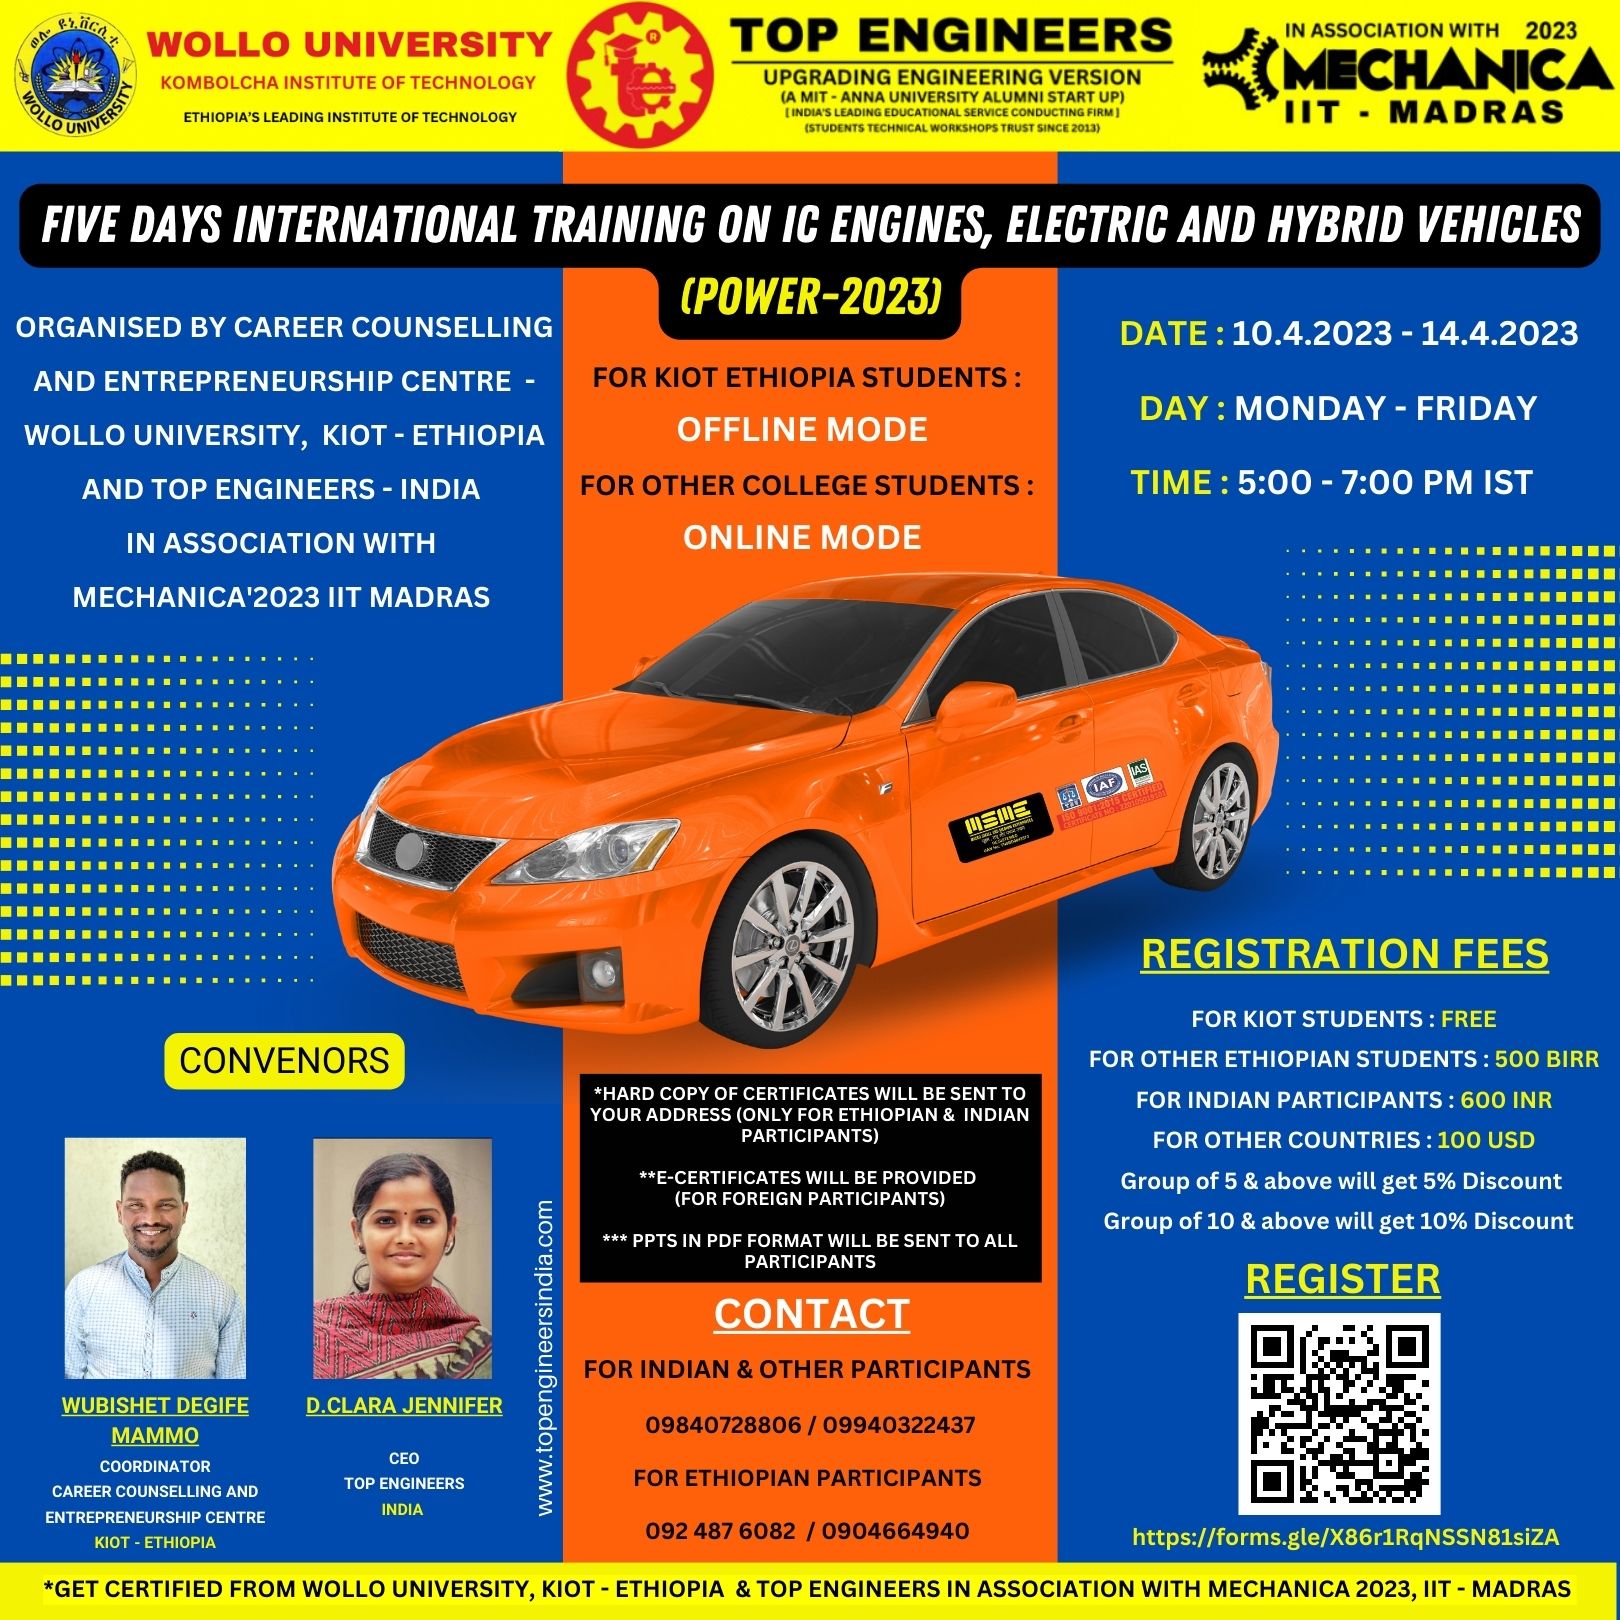 Five Days International Training on IC Engines, Electric and Hybrid Vehicles (Power-2023)